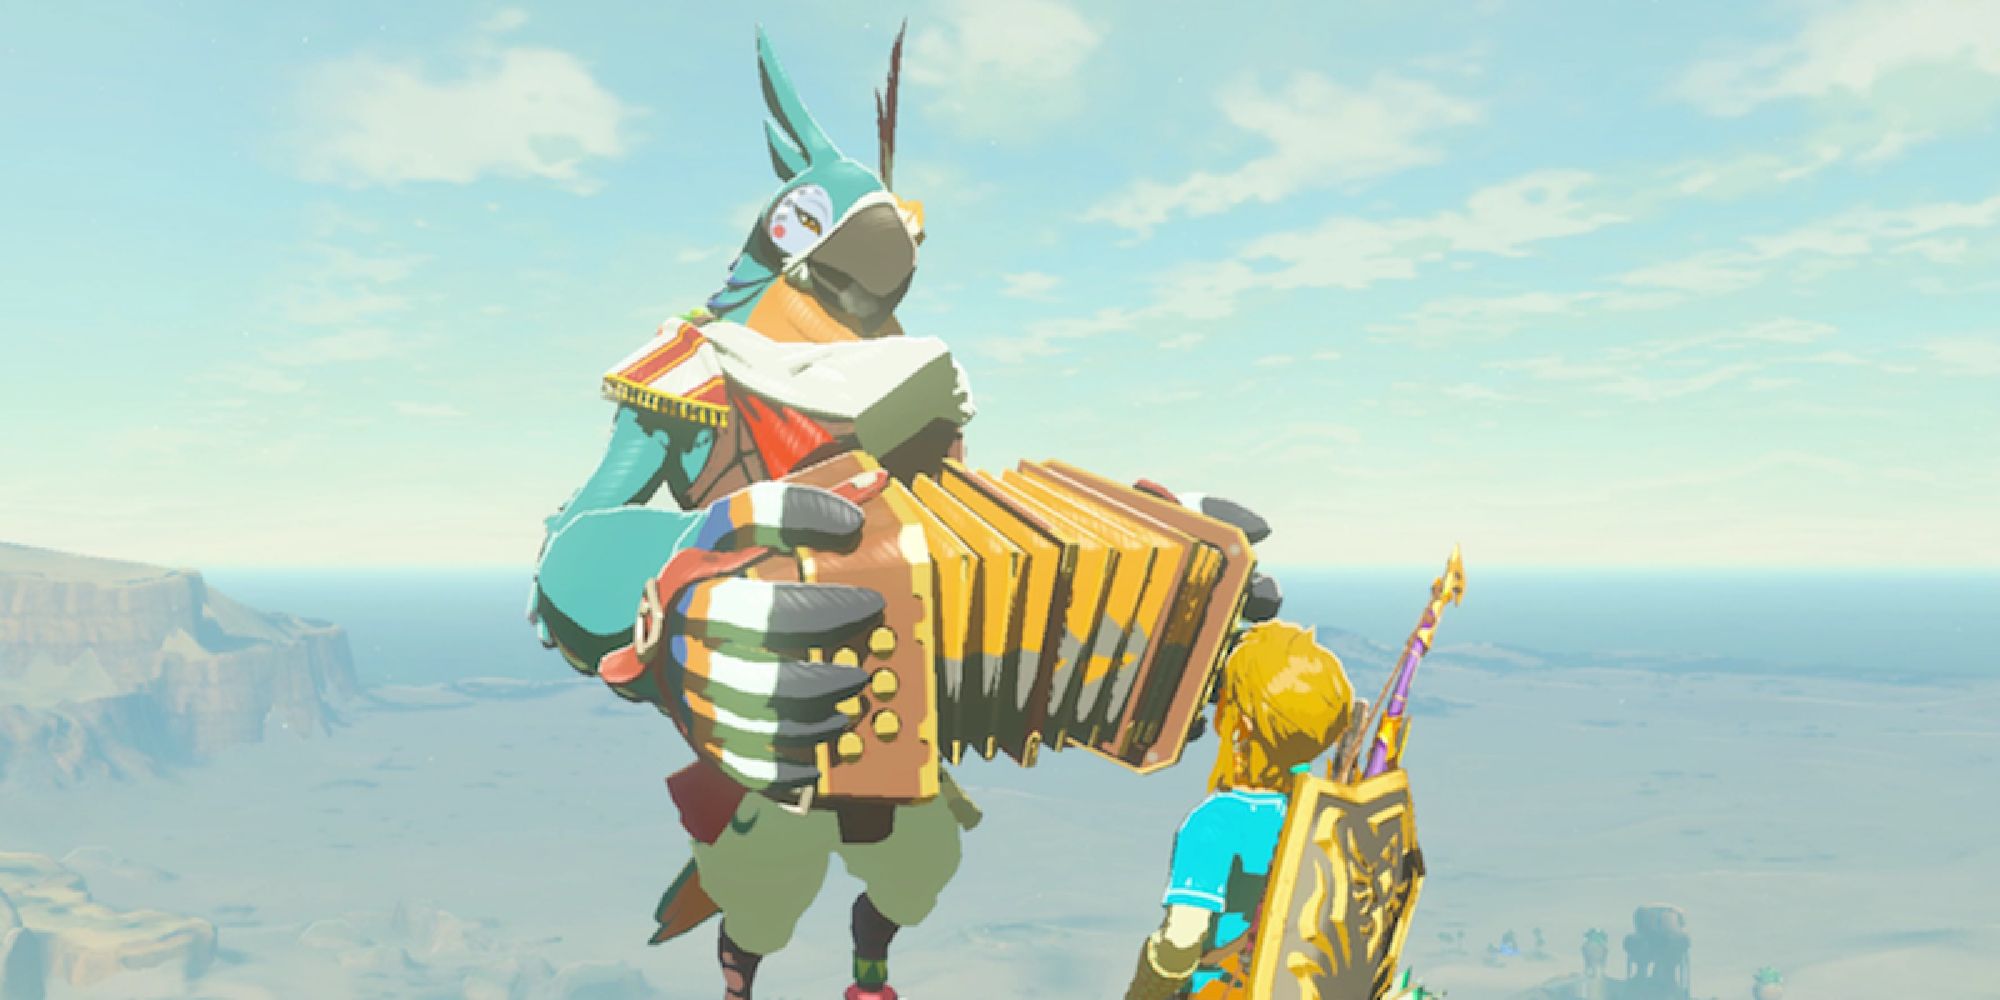 Kass holding his accordion and speaking to Link from a high point in Breath of the Wild